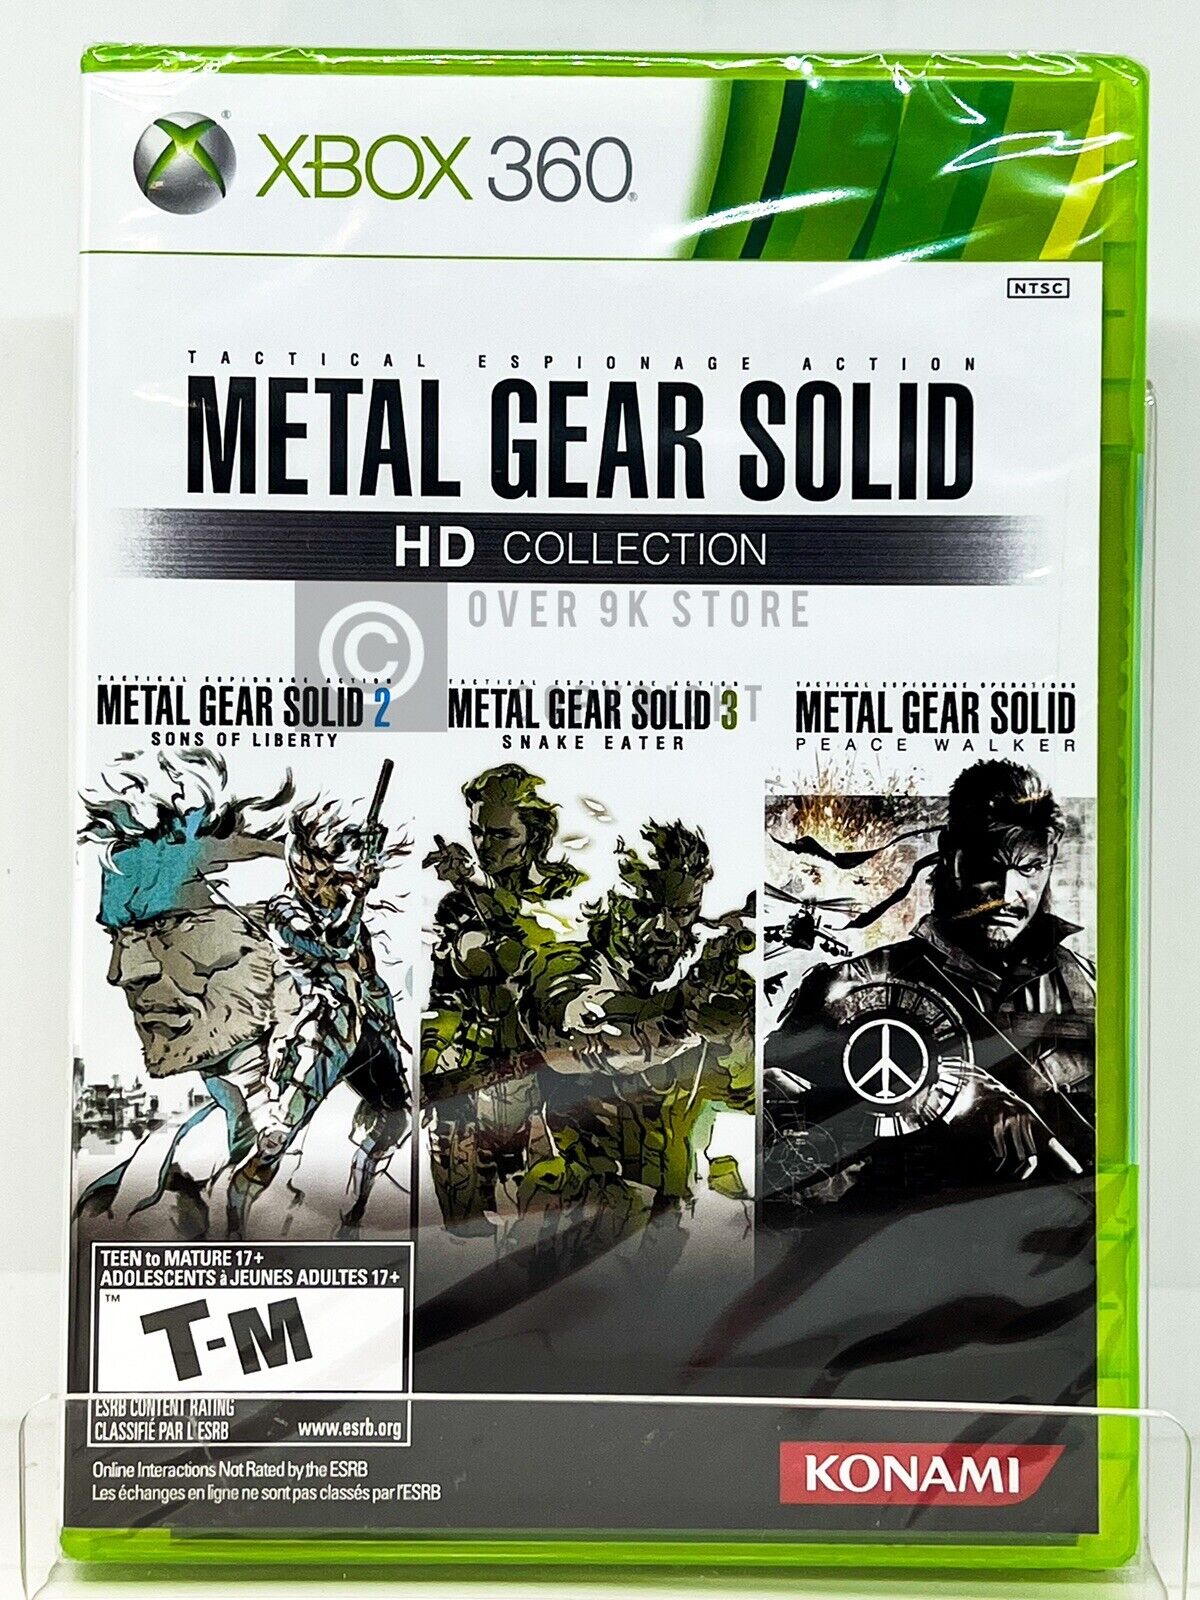 Metal Gear Solid HD Collection - Xbox 360 - Brand New | Factory Sealed  83717301325 | eBay